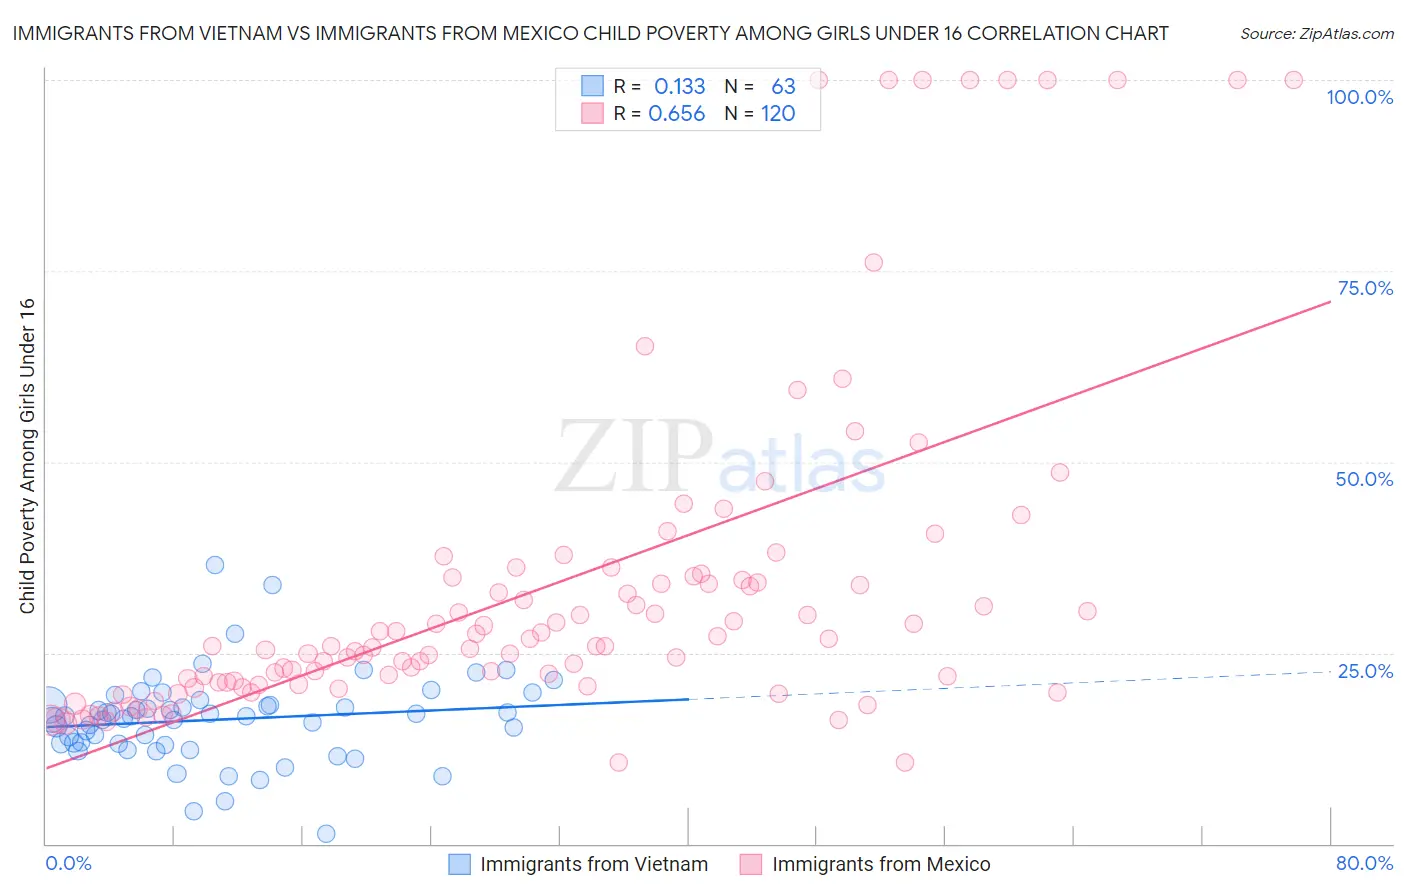 Immigrants from Vietnam vs Immigrants from Mexico Child Poverty Among Girls Under 16